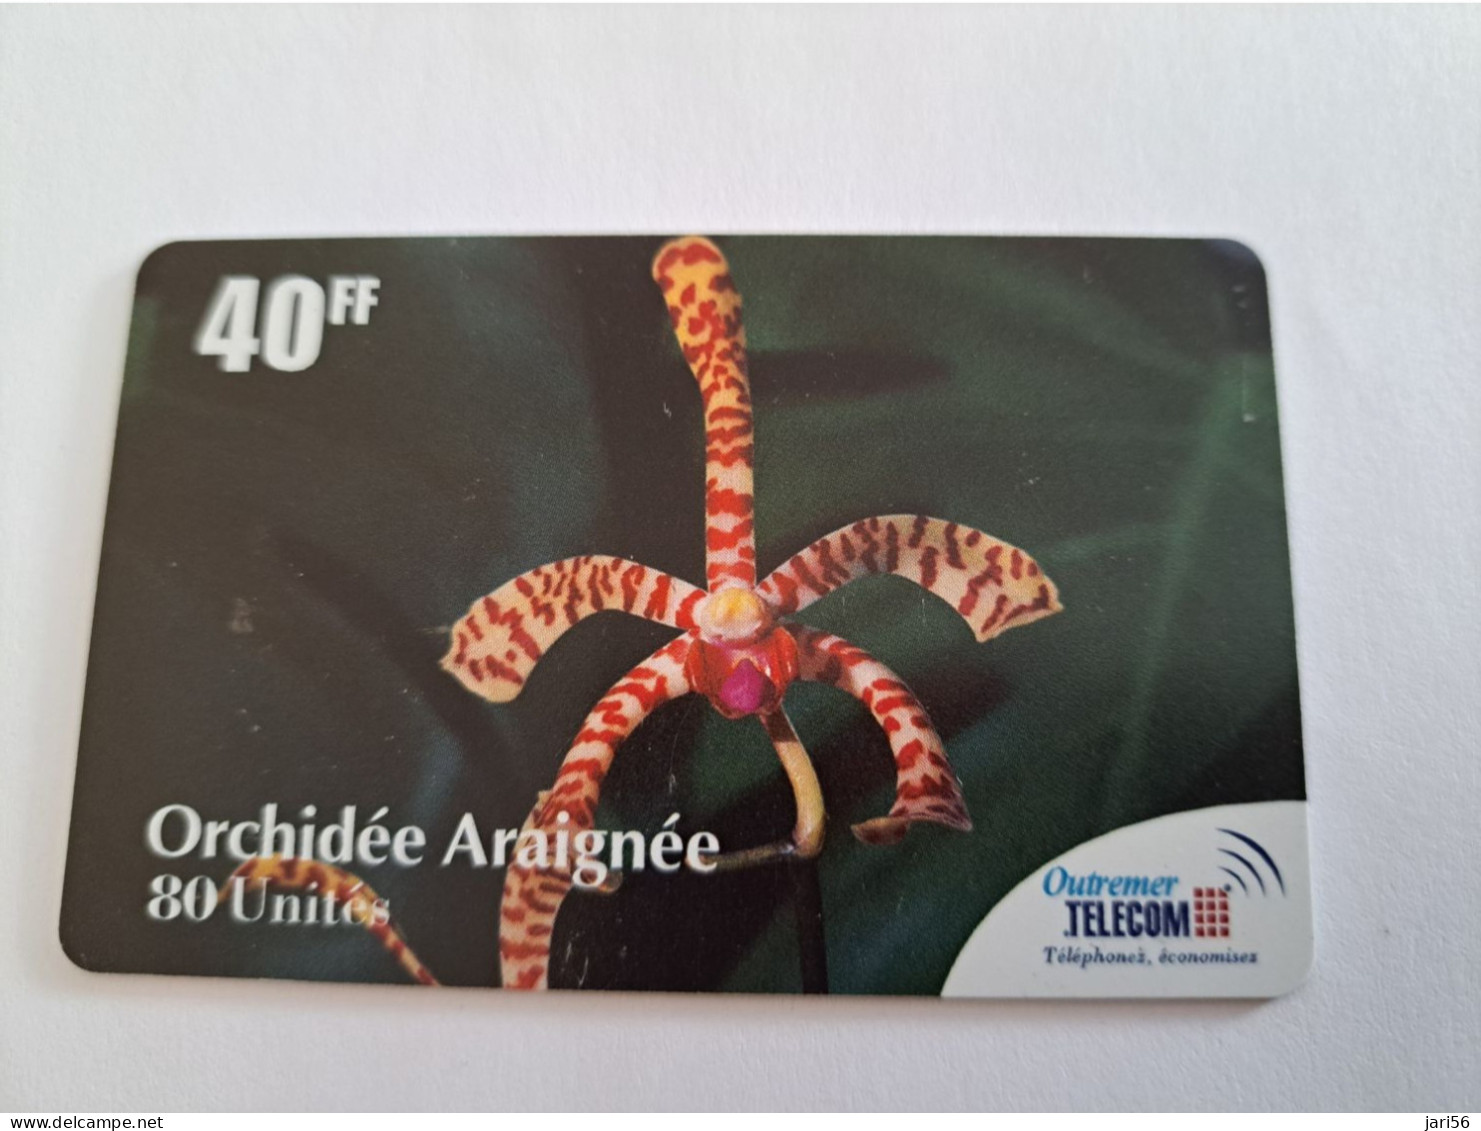 ST MARTIN  / OUTREMER/ FLOWERS/ ORCHIDEE ARAIGNEE   / 40 FF/ 80  UNITS / ANTF-OT51  FINE USED CARD    ** 13919 ** - Antillen (Frans)